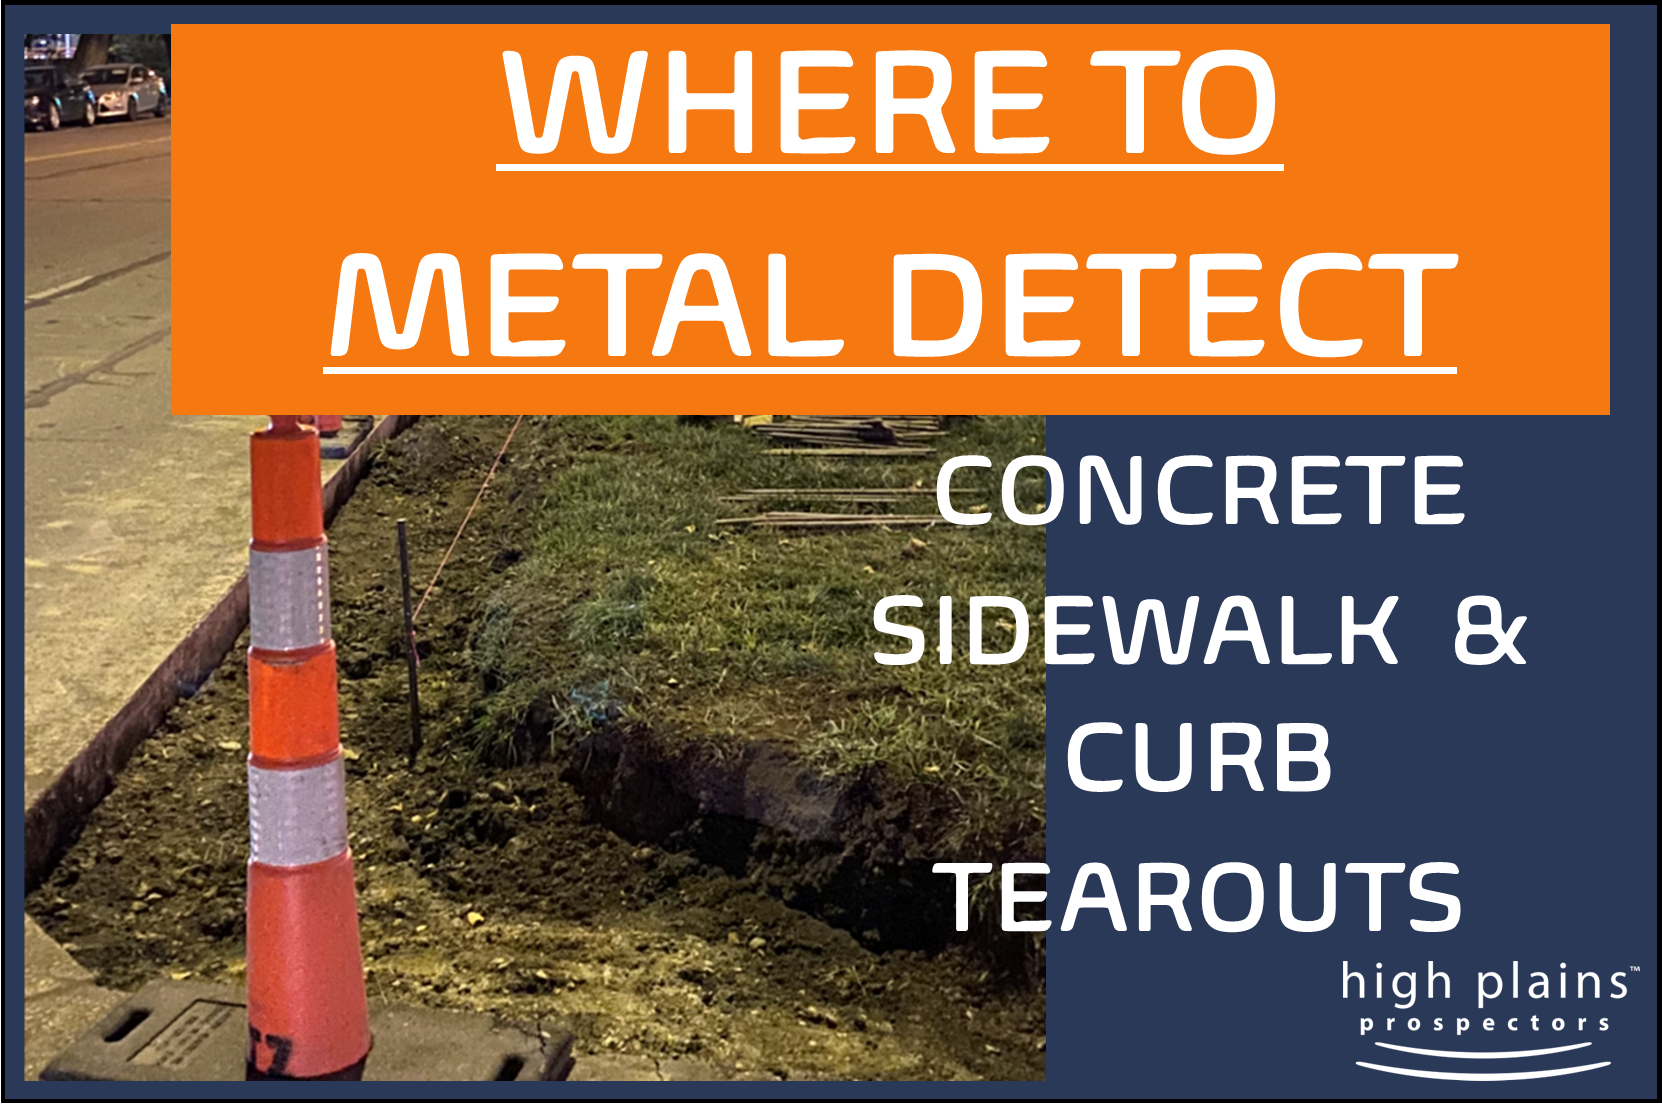 Where to Metal Detect - Old Sidewalk, Parking Lot, and Curb Tear-Outs